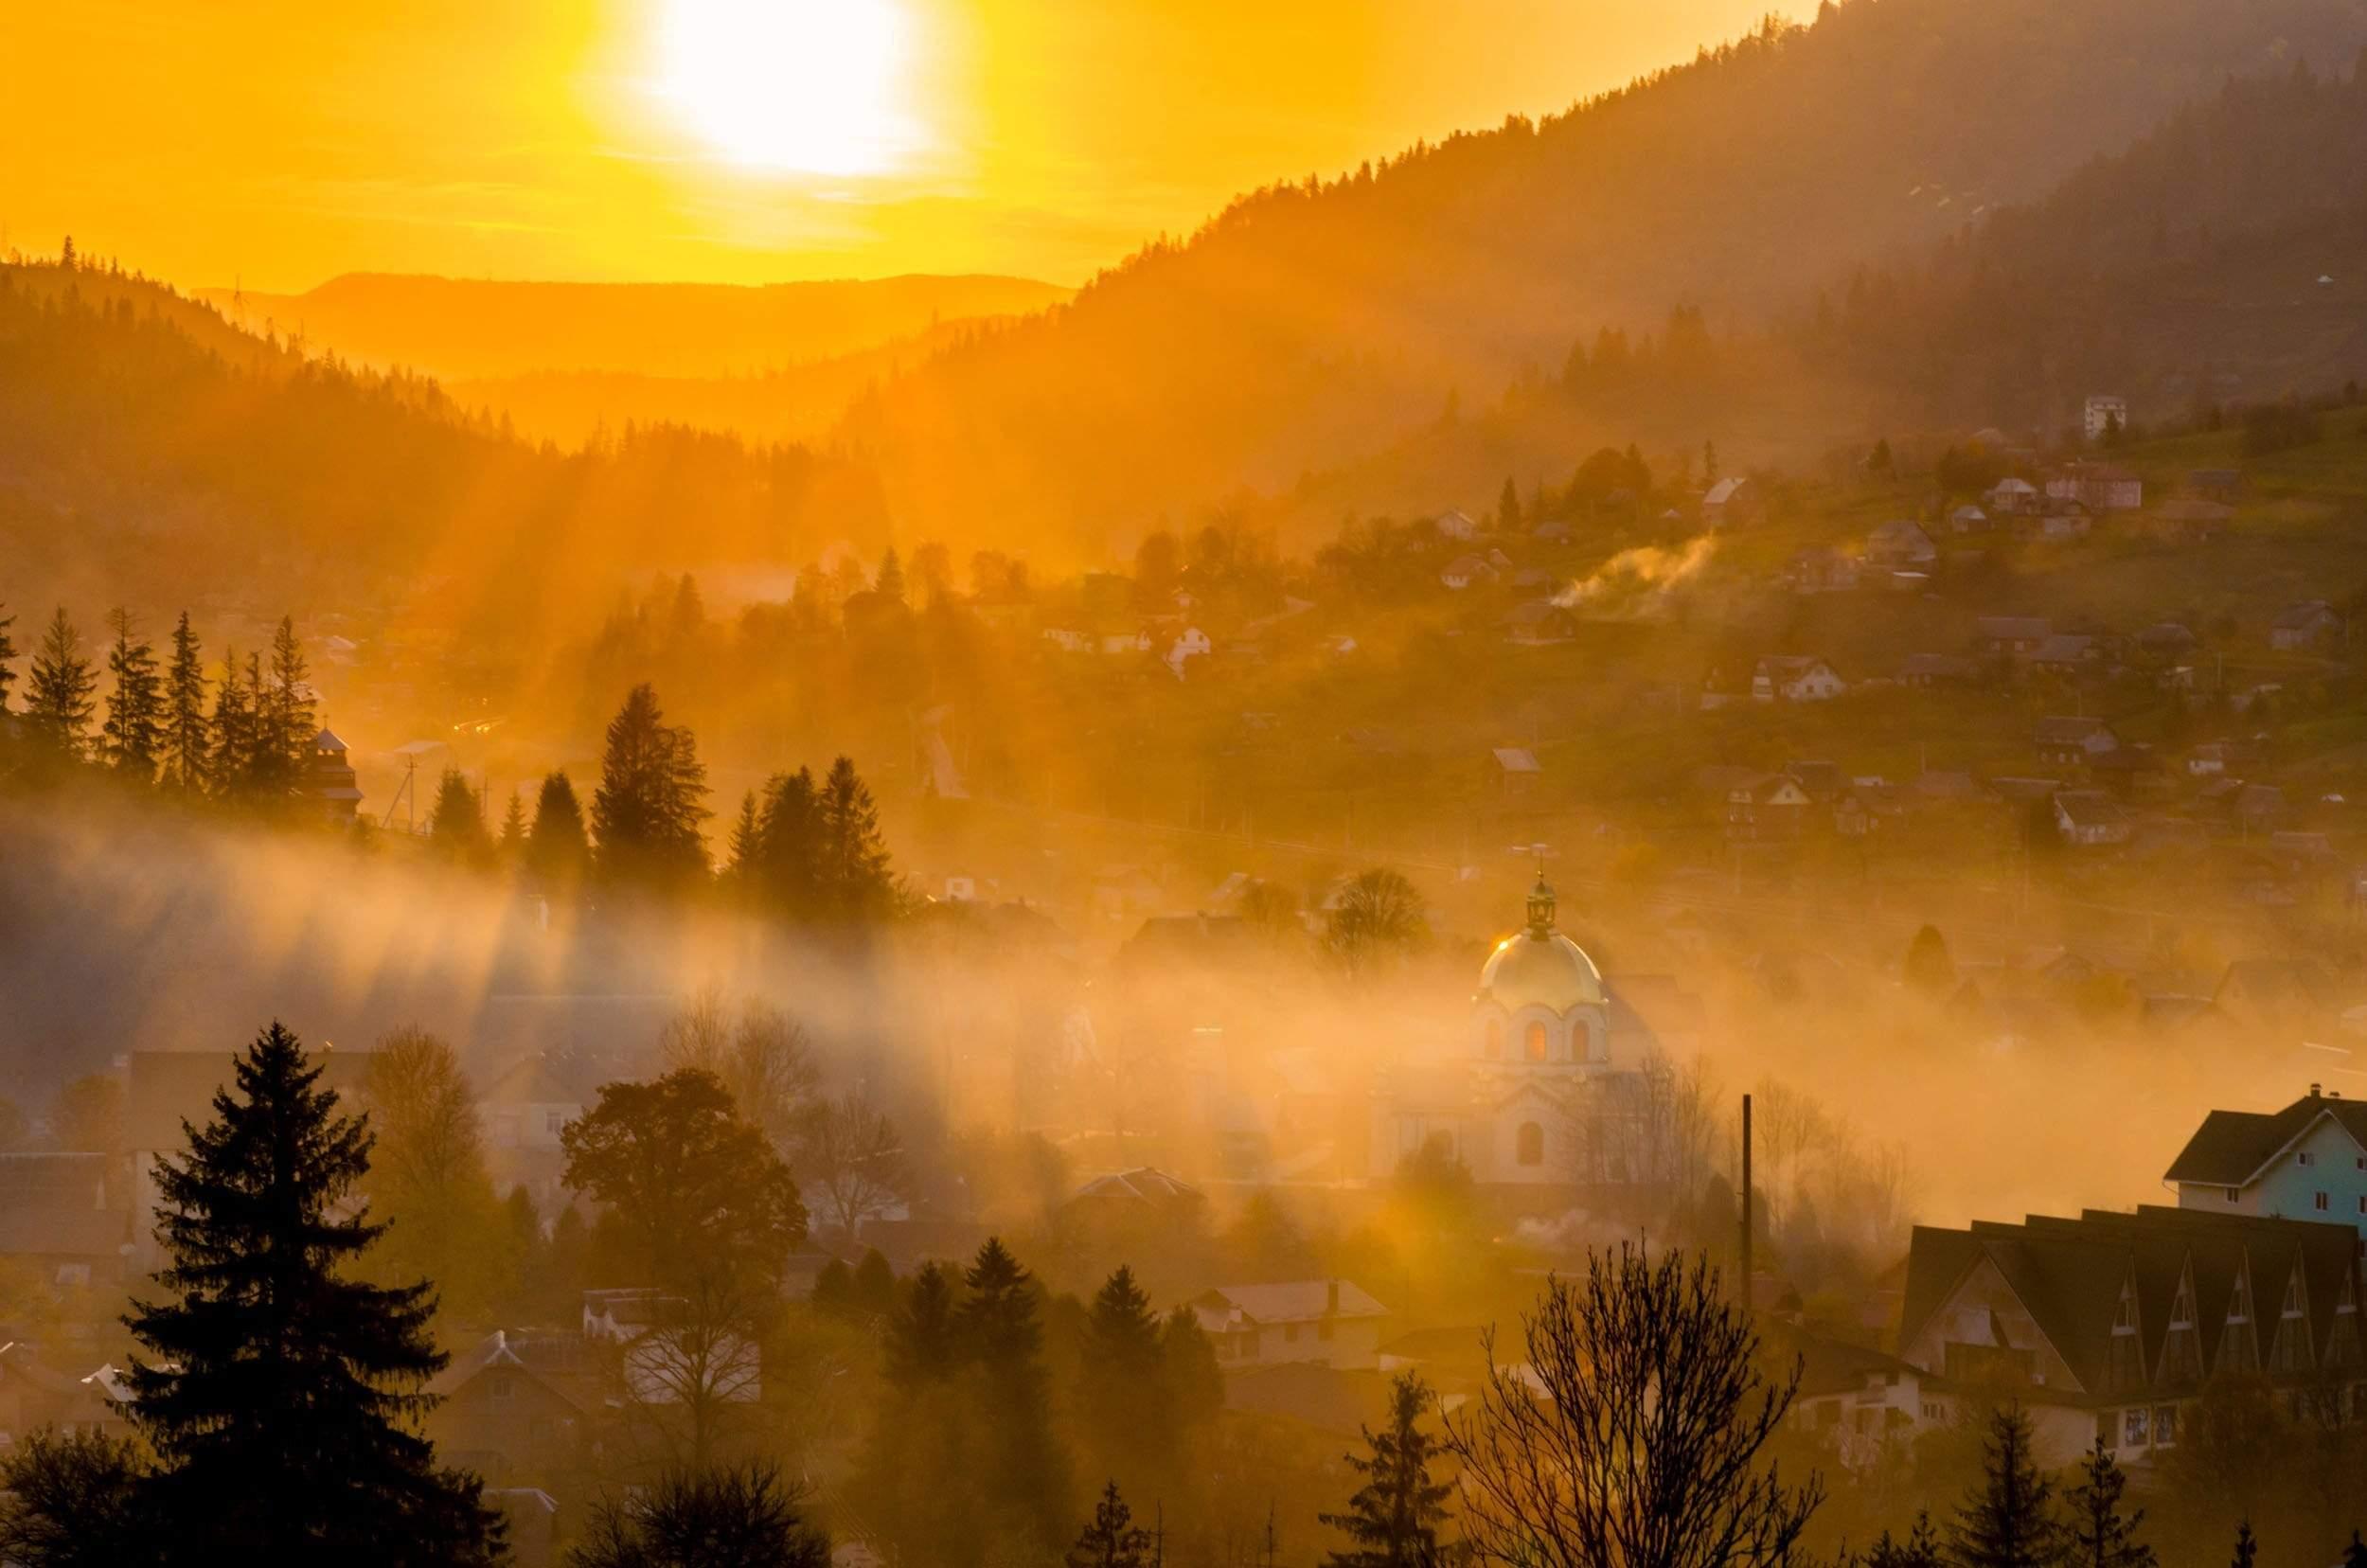 Sunset of misty small town